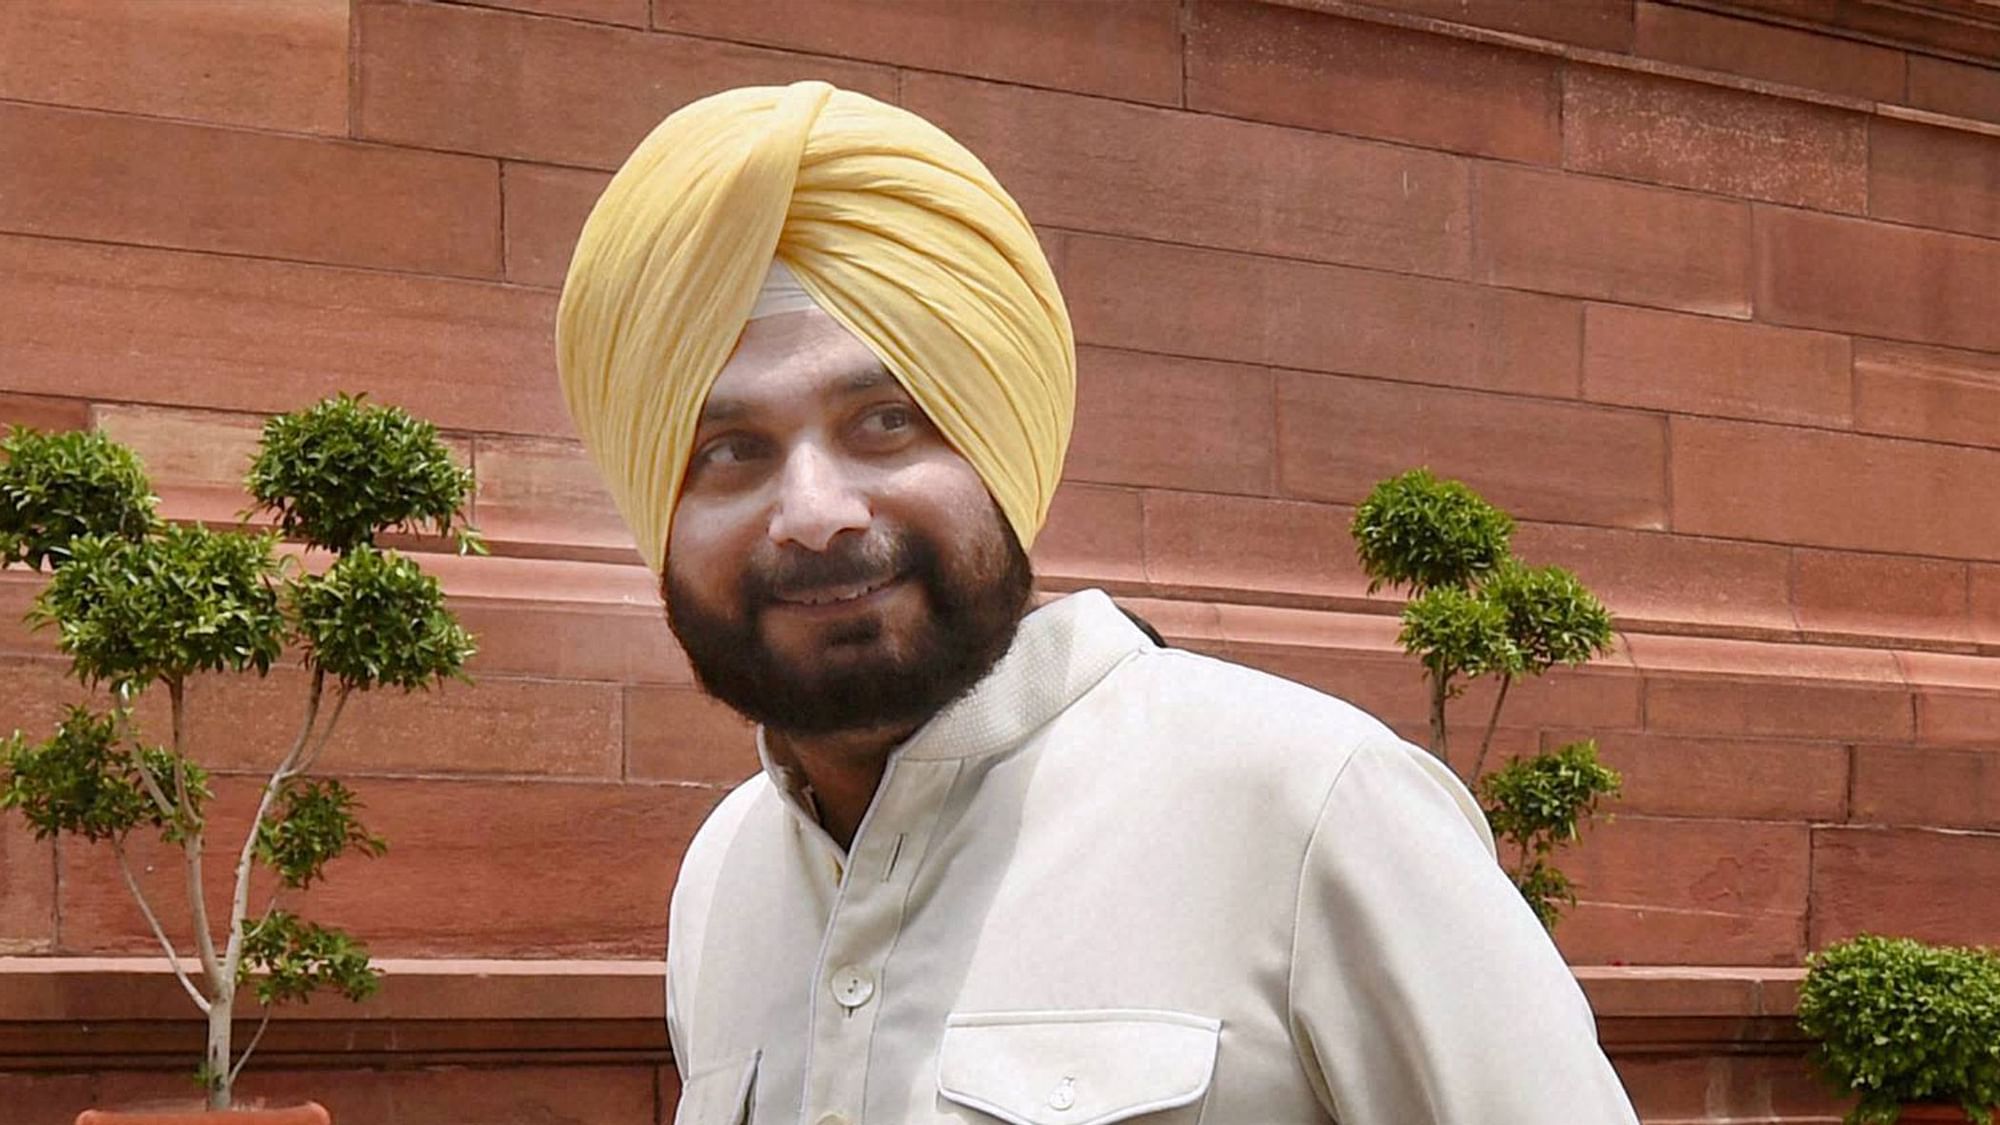 Navjot Singh Sidhu may have to hang up his politician’s hat if the Supreme Court upholds his conviction in a 1988 road rage case.